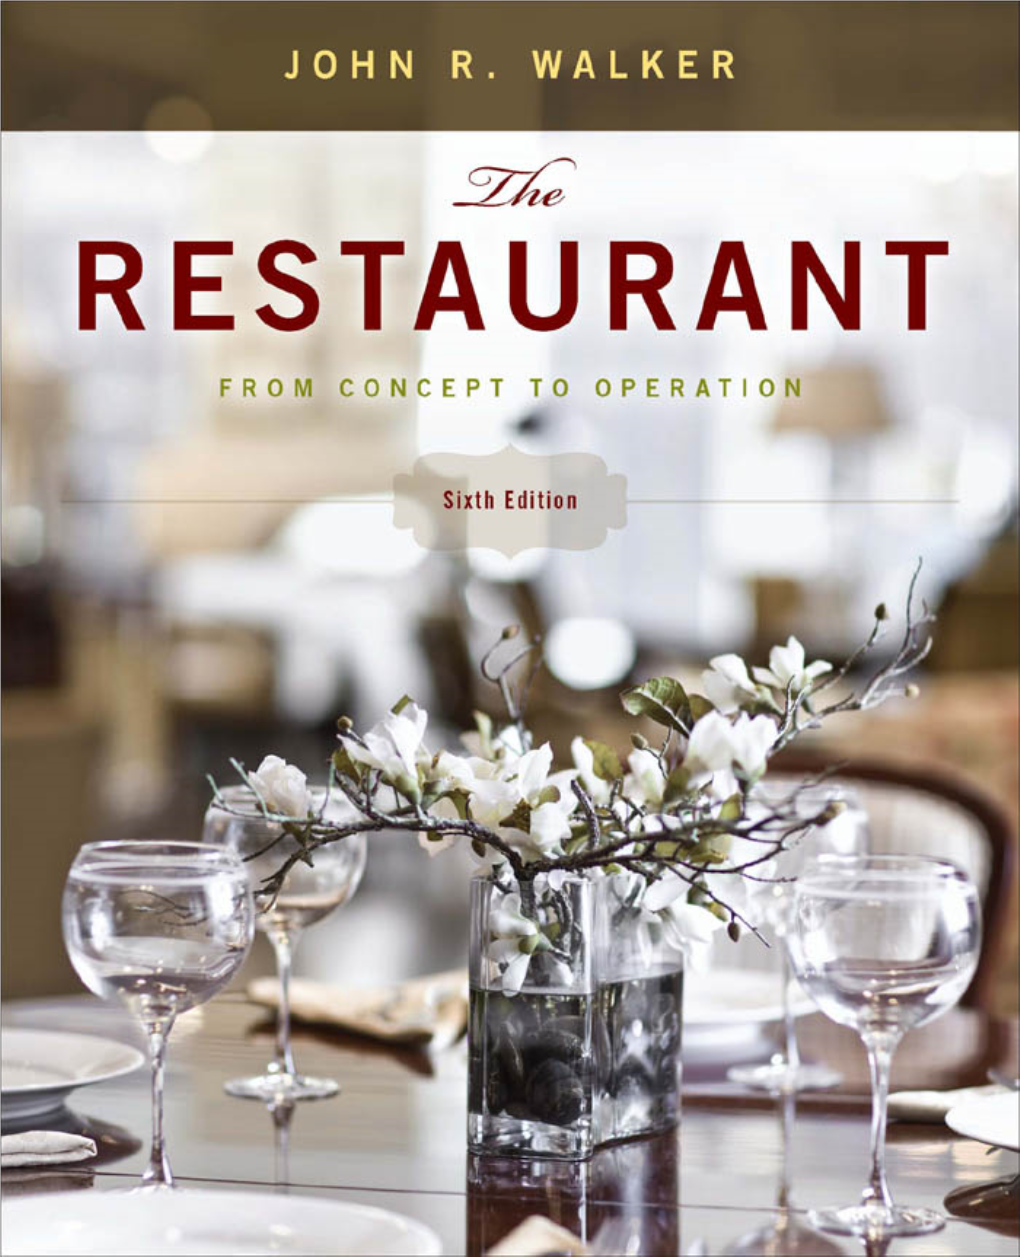 The Restaurant: from Concept to Operation, Sixth Edition